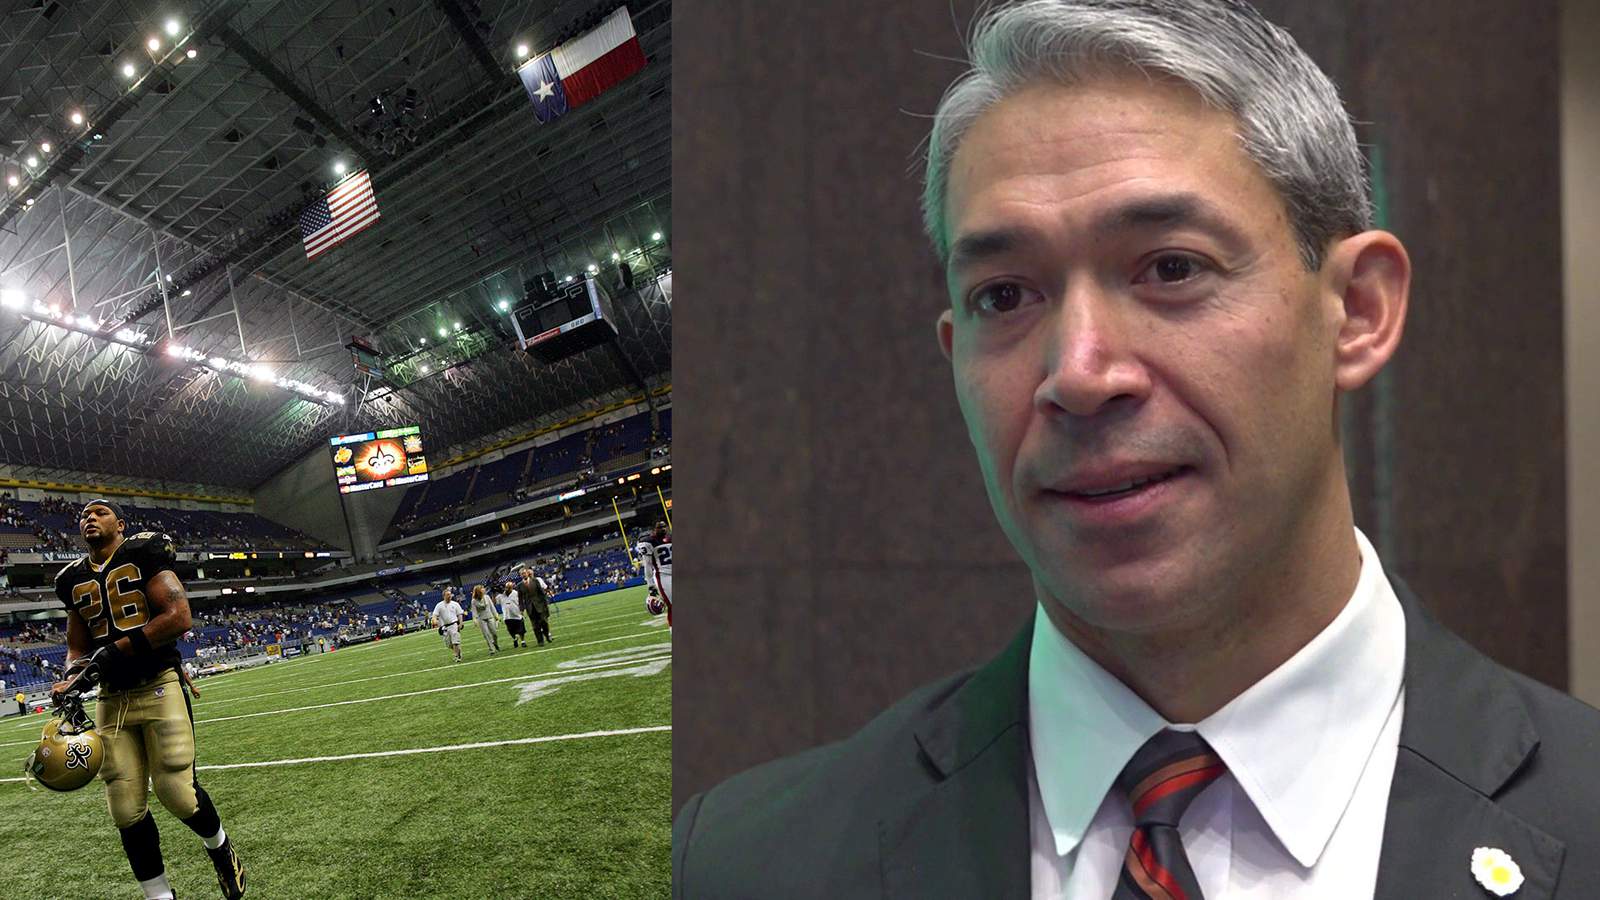 Mayor Nirenberg remains confident San Antonio can get NFL franchise within 10 years, here’s why